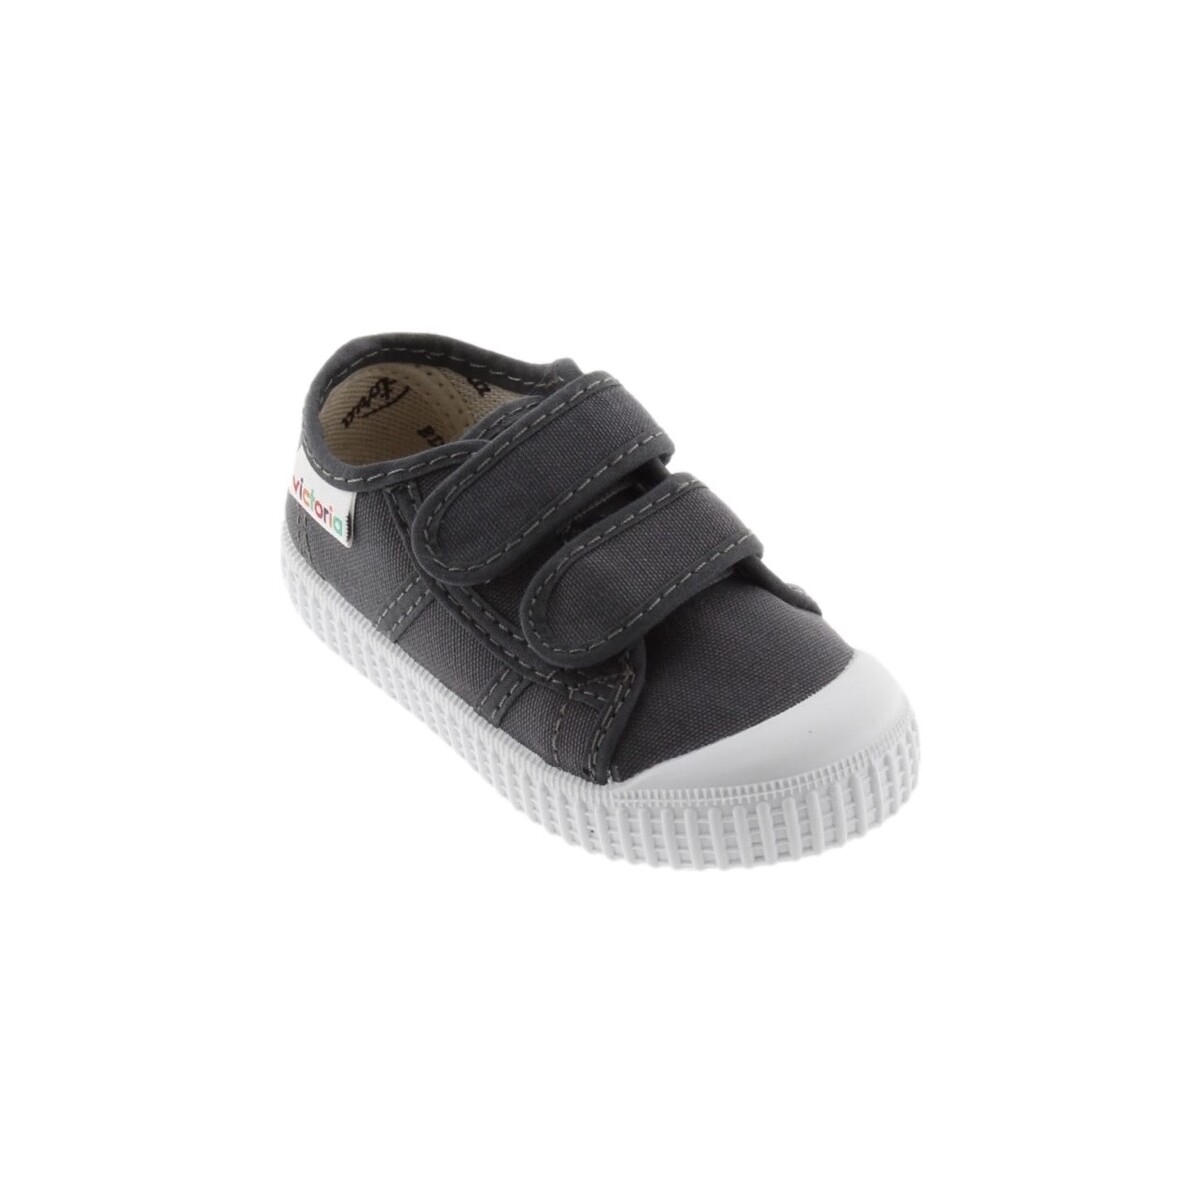 Victoria Gris Baby 36606 - Antracite 68Ma1heQ